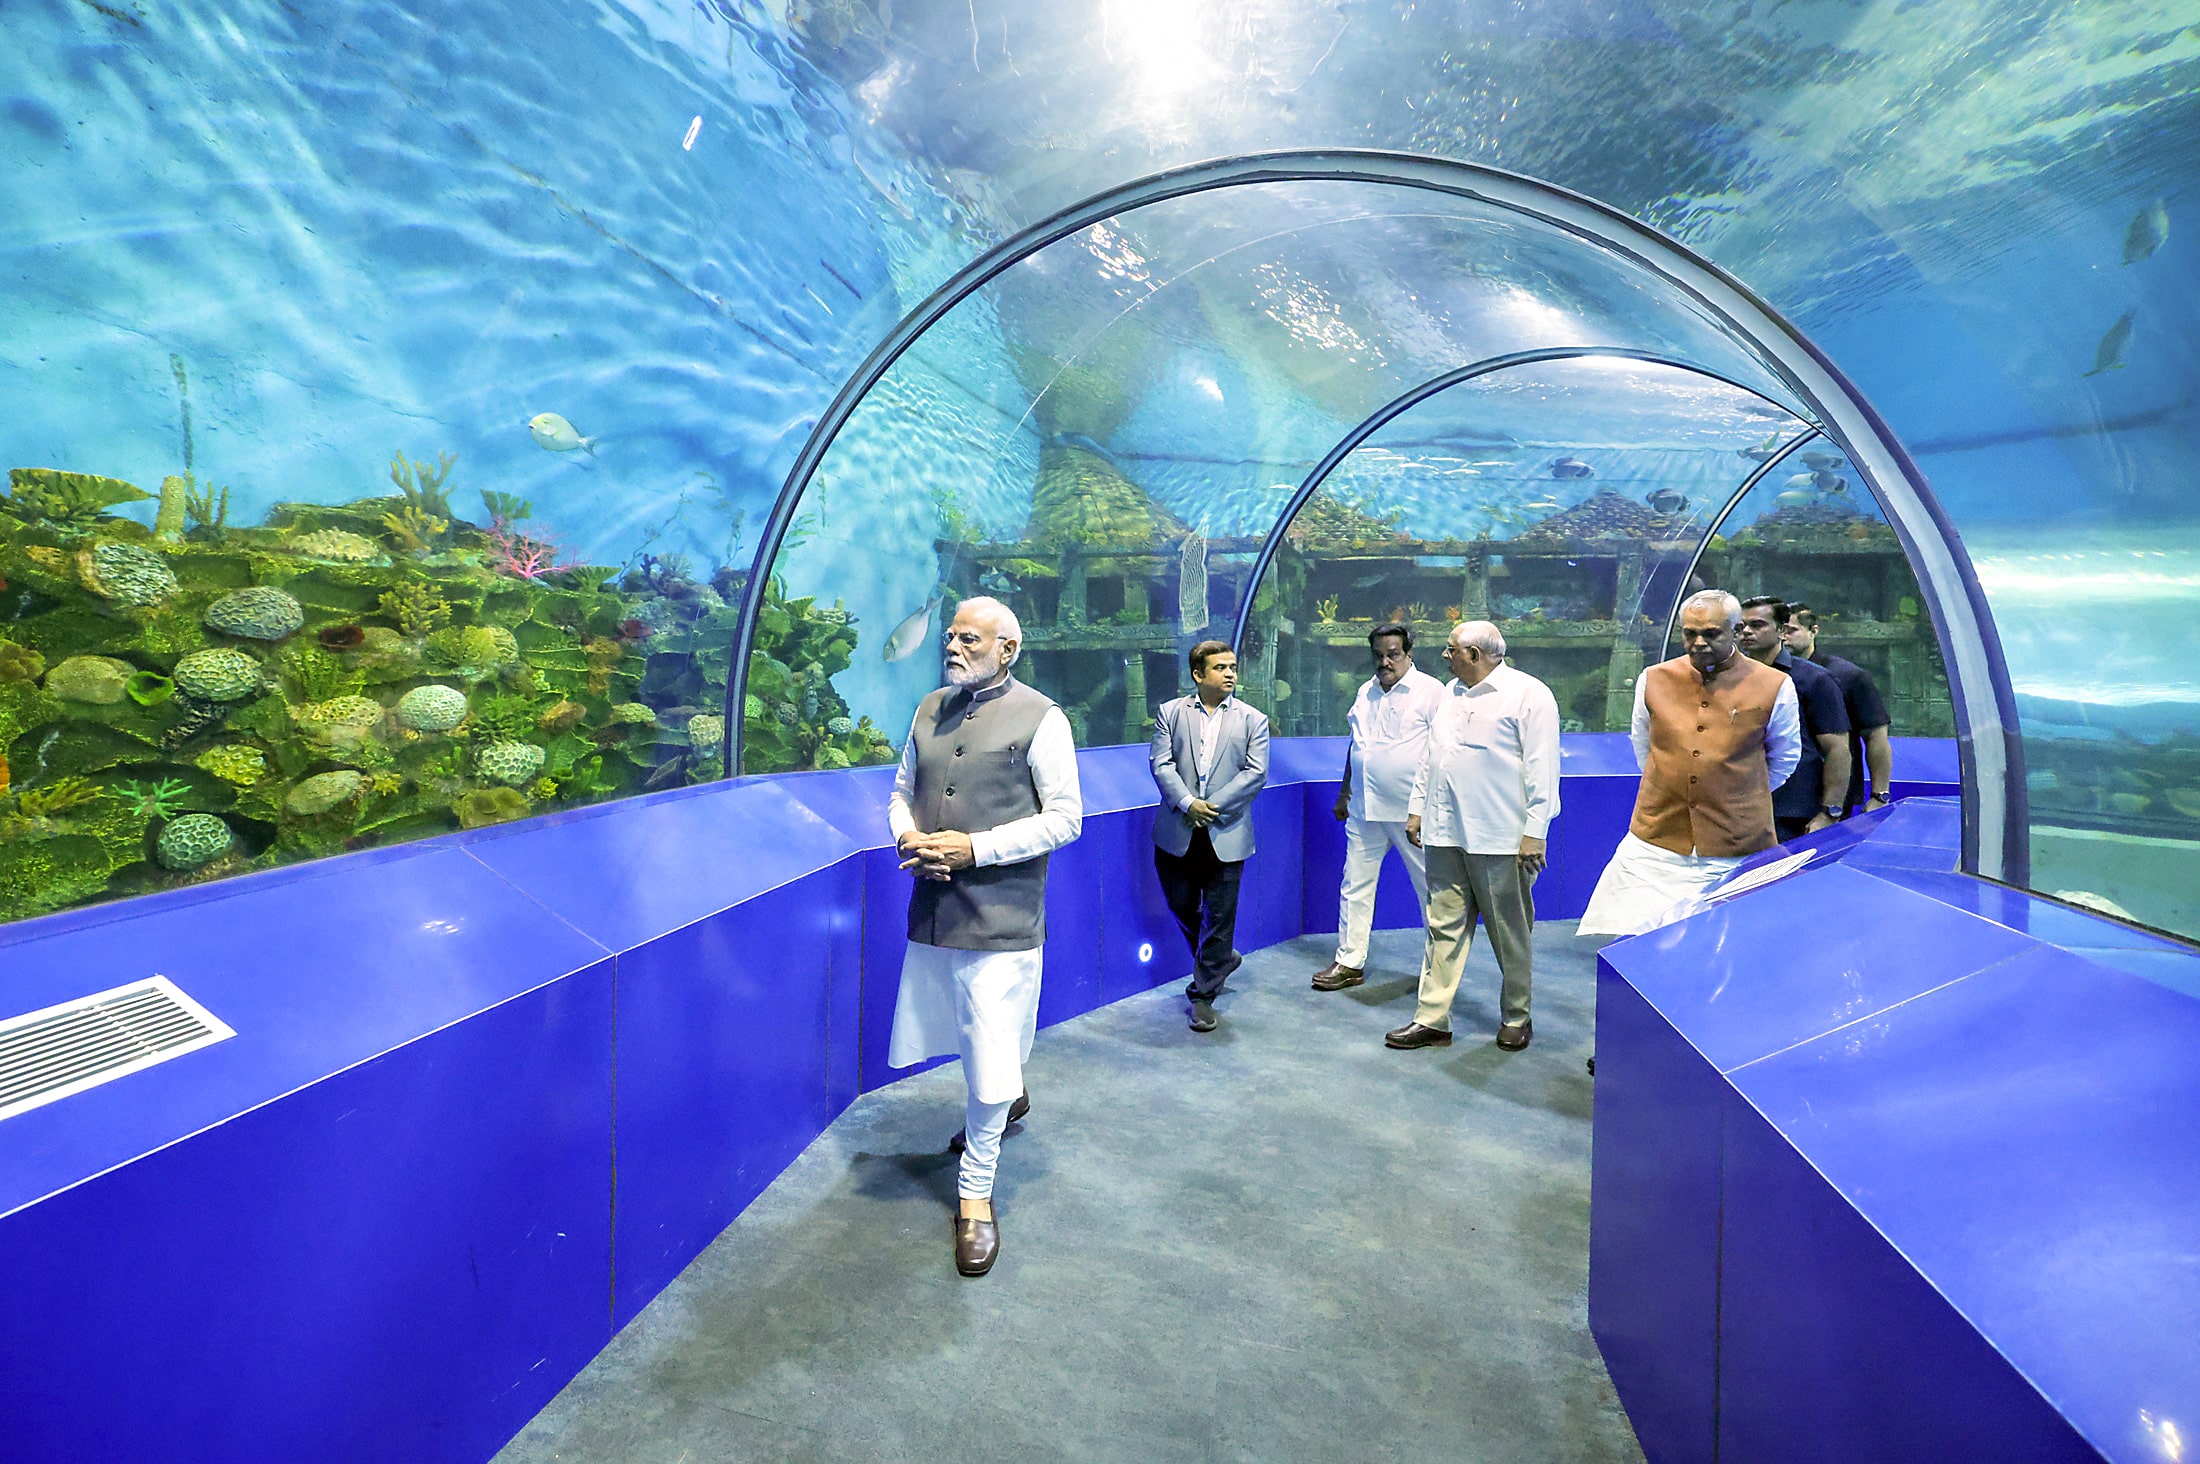 Prime Minister Narendra Modi visits Aquatic Gallery with Acharya Devvrat, Bhupendra Patel, CR Paatil and others.